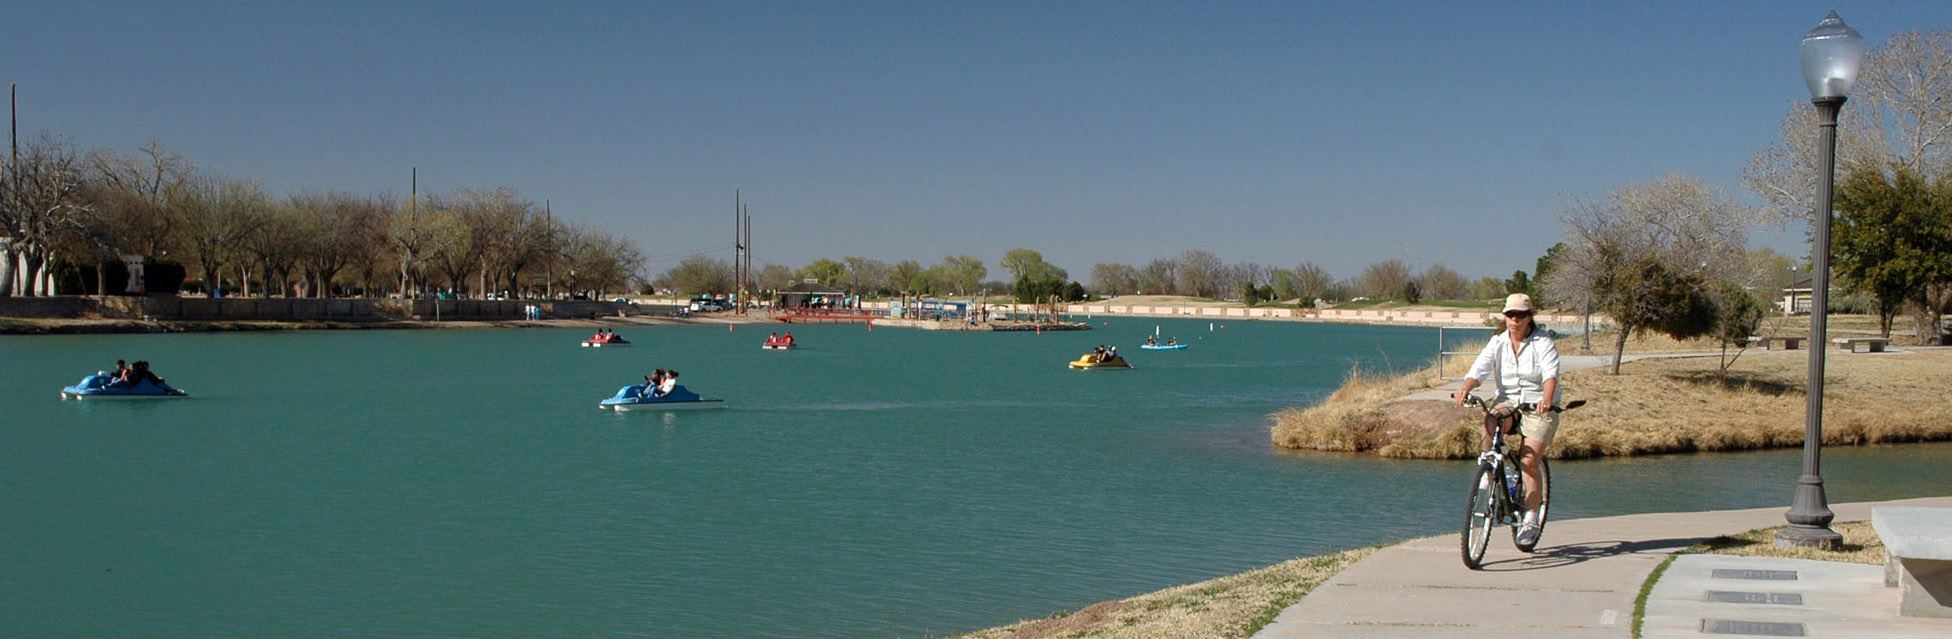 The Pecos River winds slowly through Carlsbad. There are beaches, bike paths, a swimming area, and plenty of room for pedal boats, paddle boards, and kayaks. Photo by Russell Smiths.